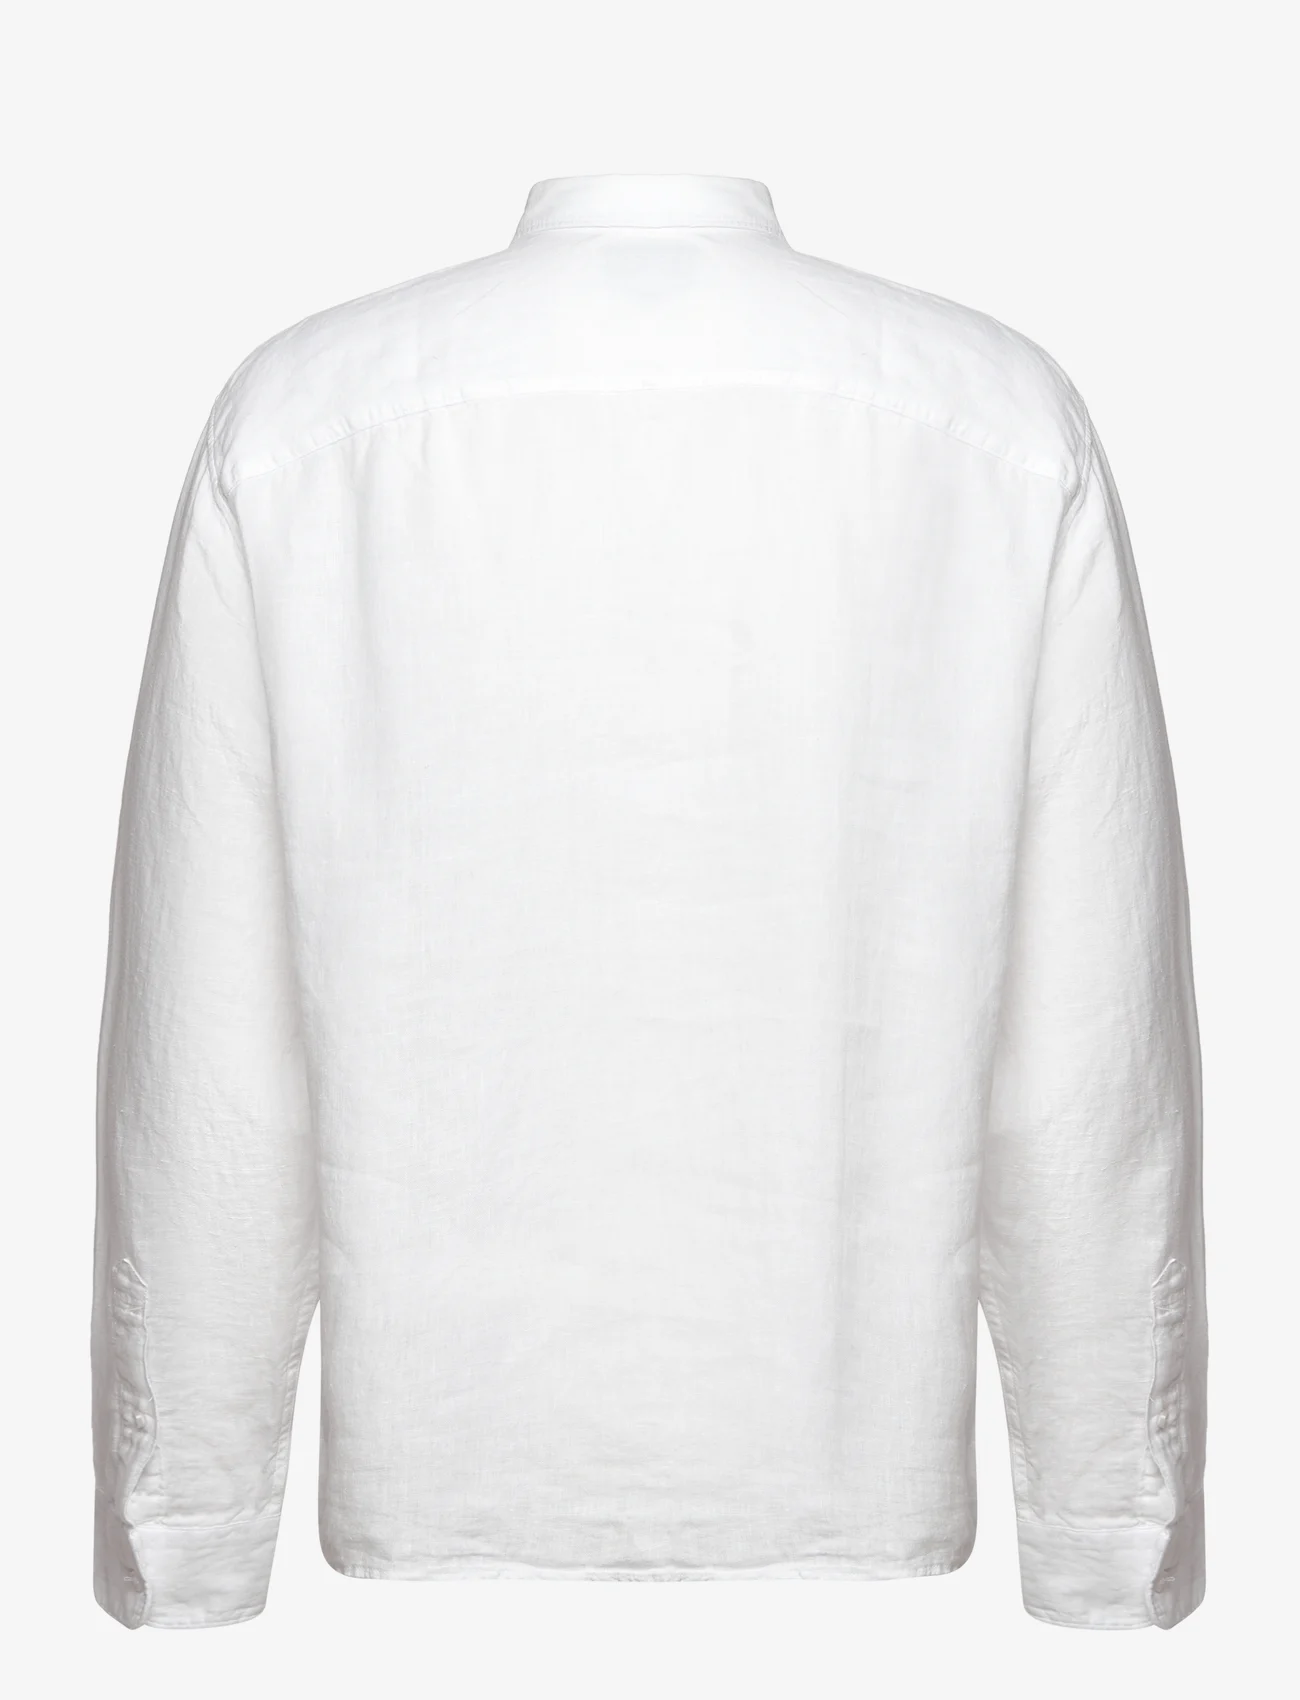 Abercrombie & Fitch - ANF MENS WOVENS - linskjorter - bright white - 1